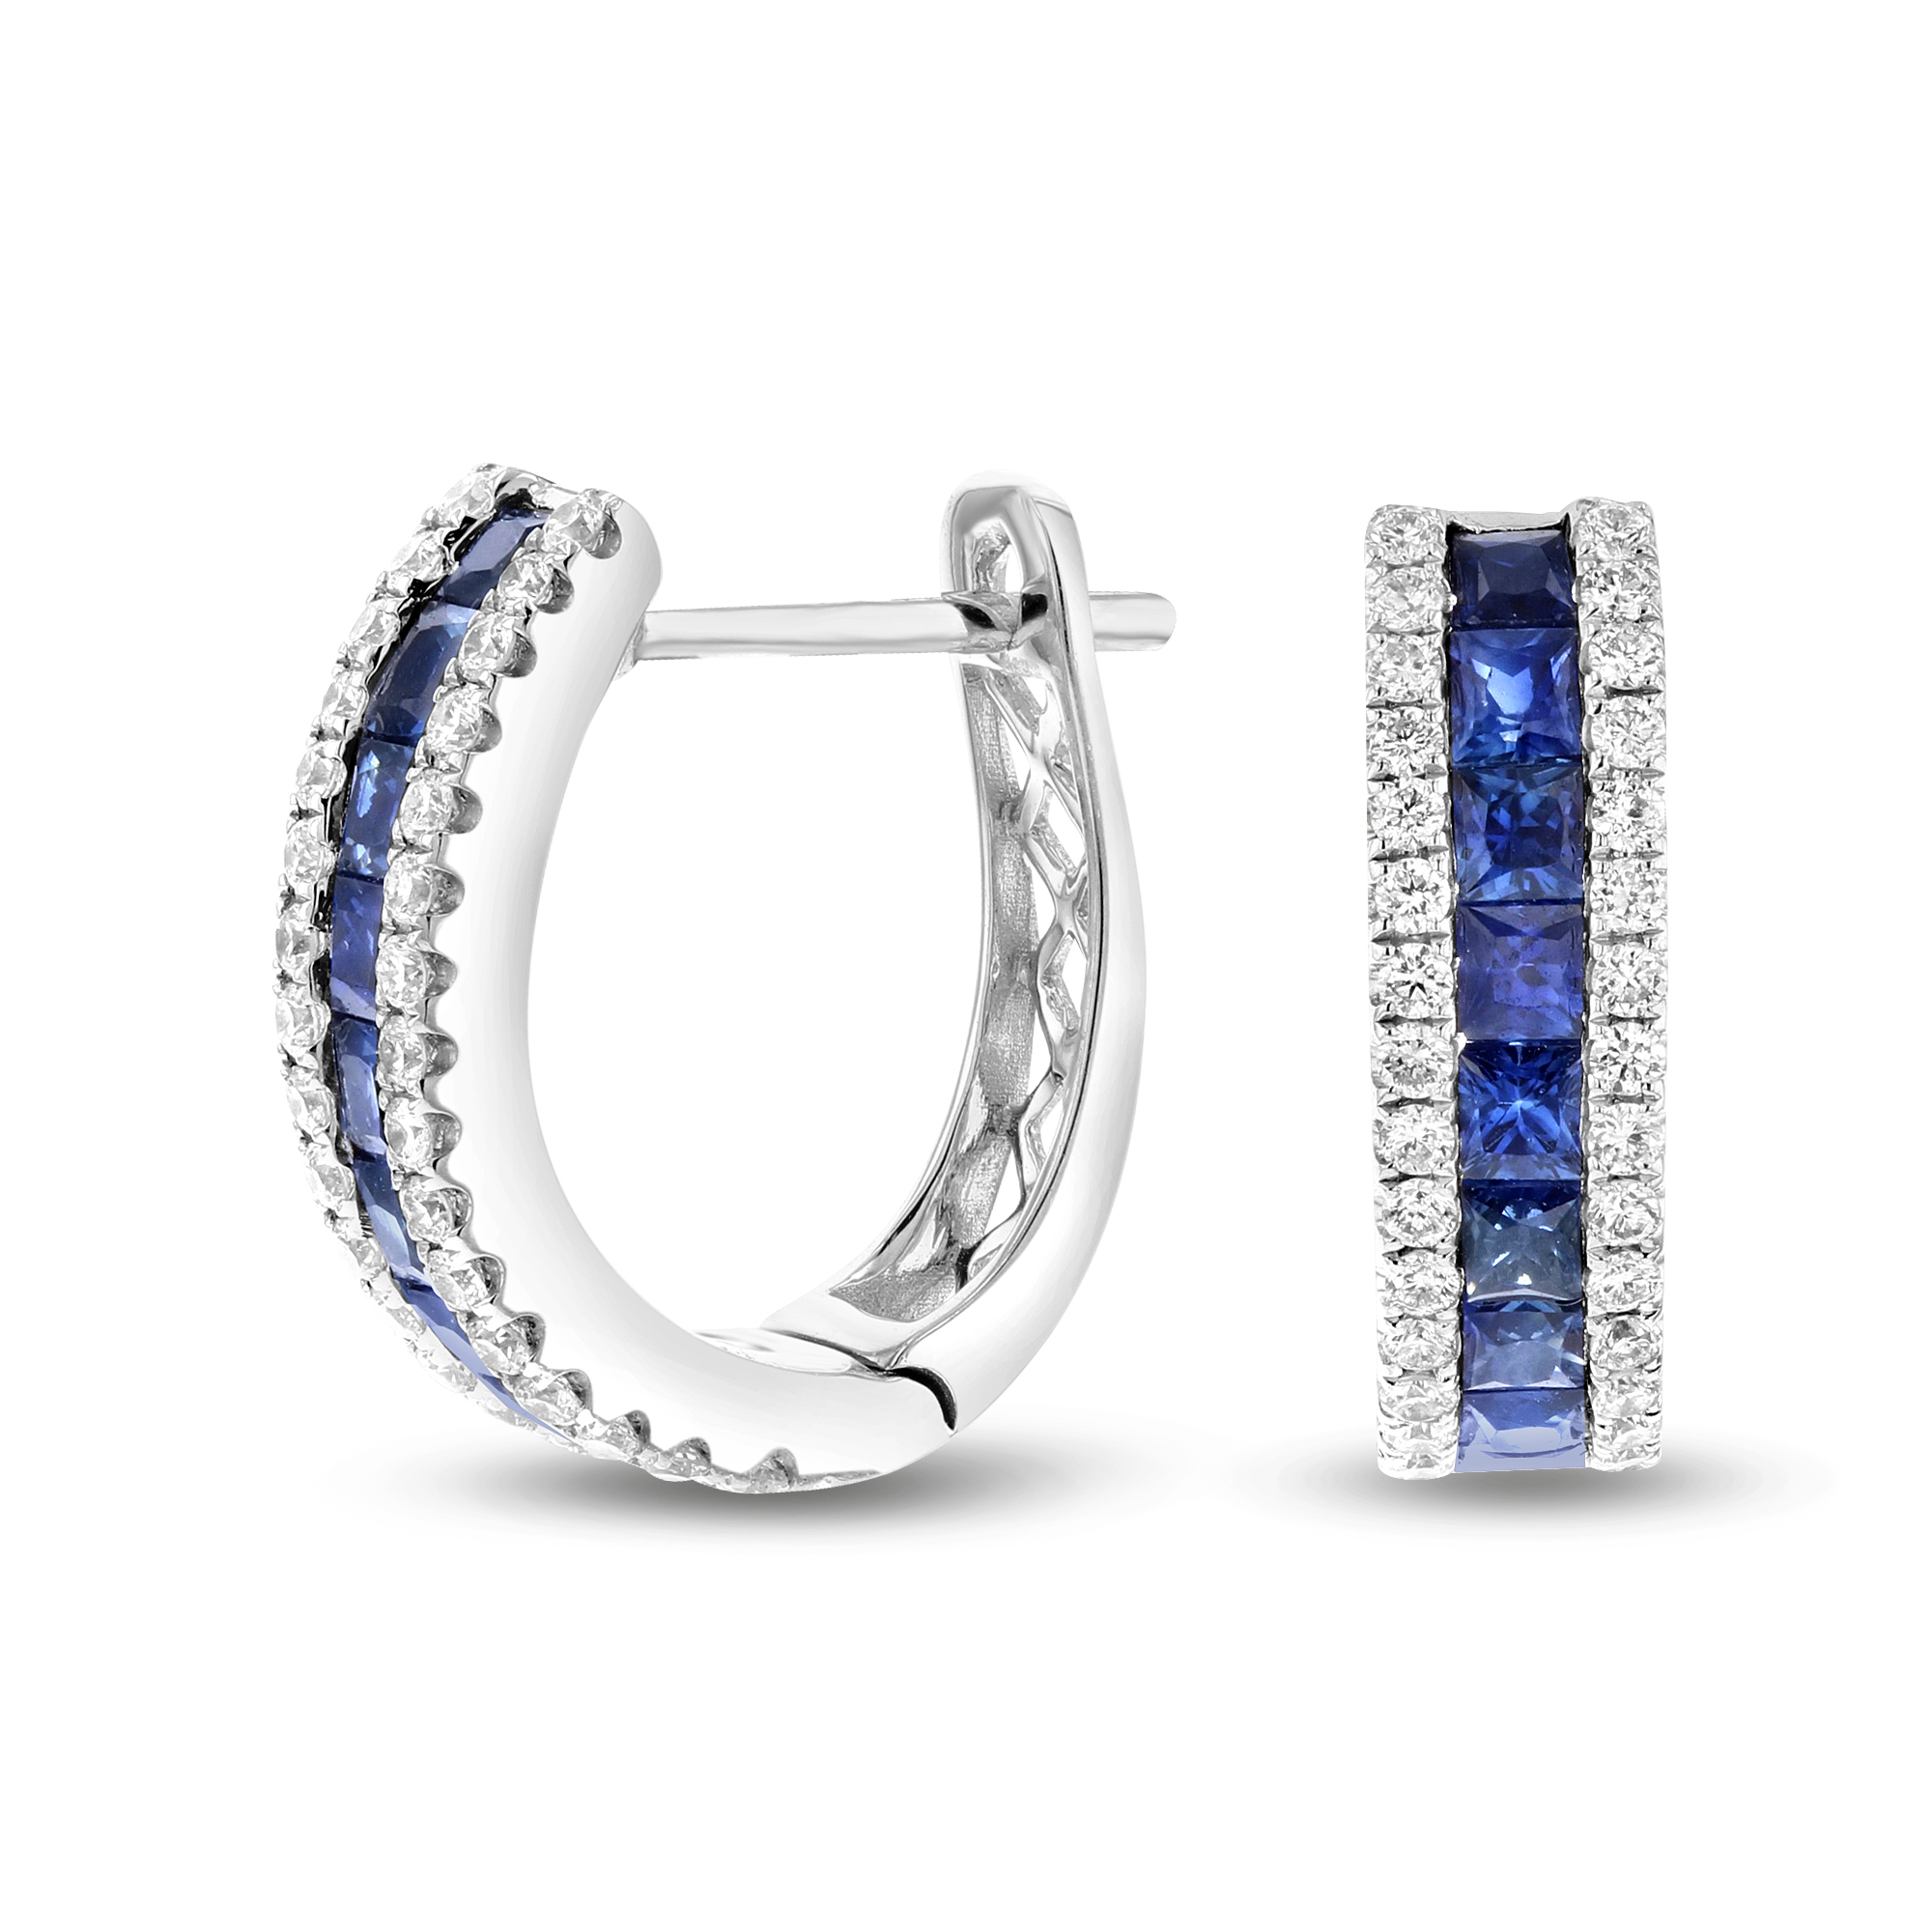 View 1.67ctw Diamond and Sapphire Hoop Earrings in 18k White Gold